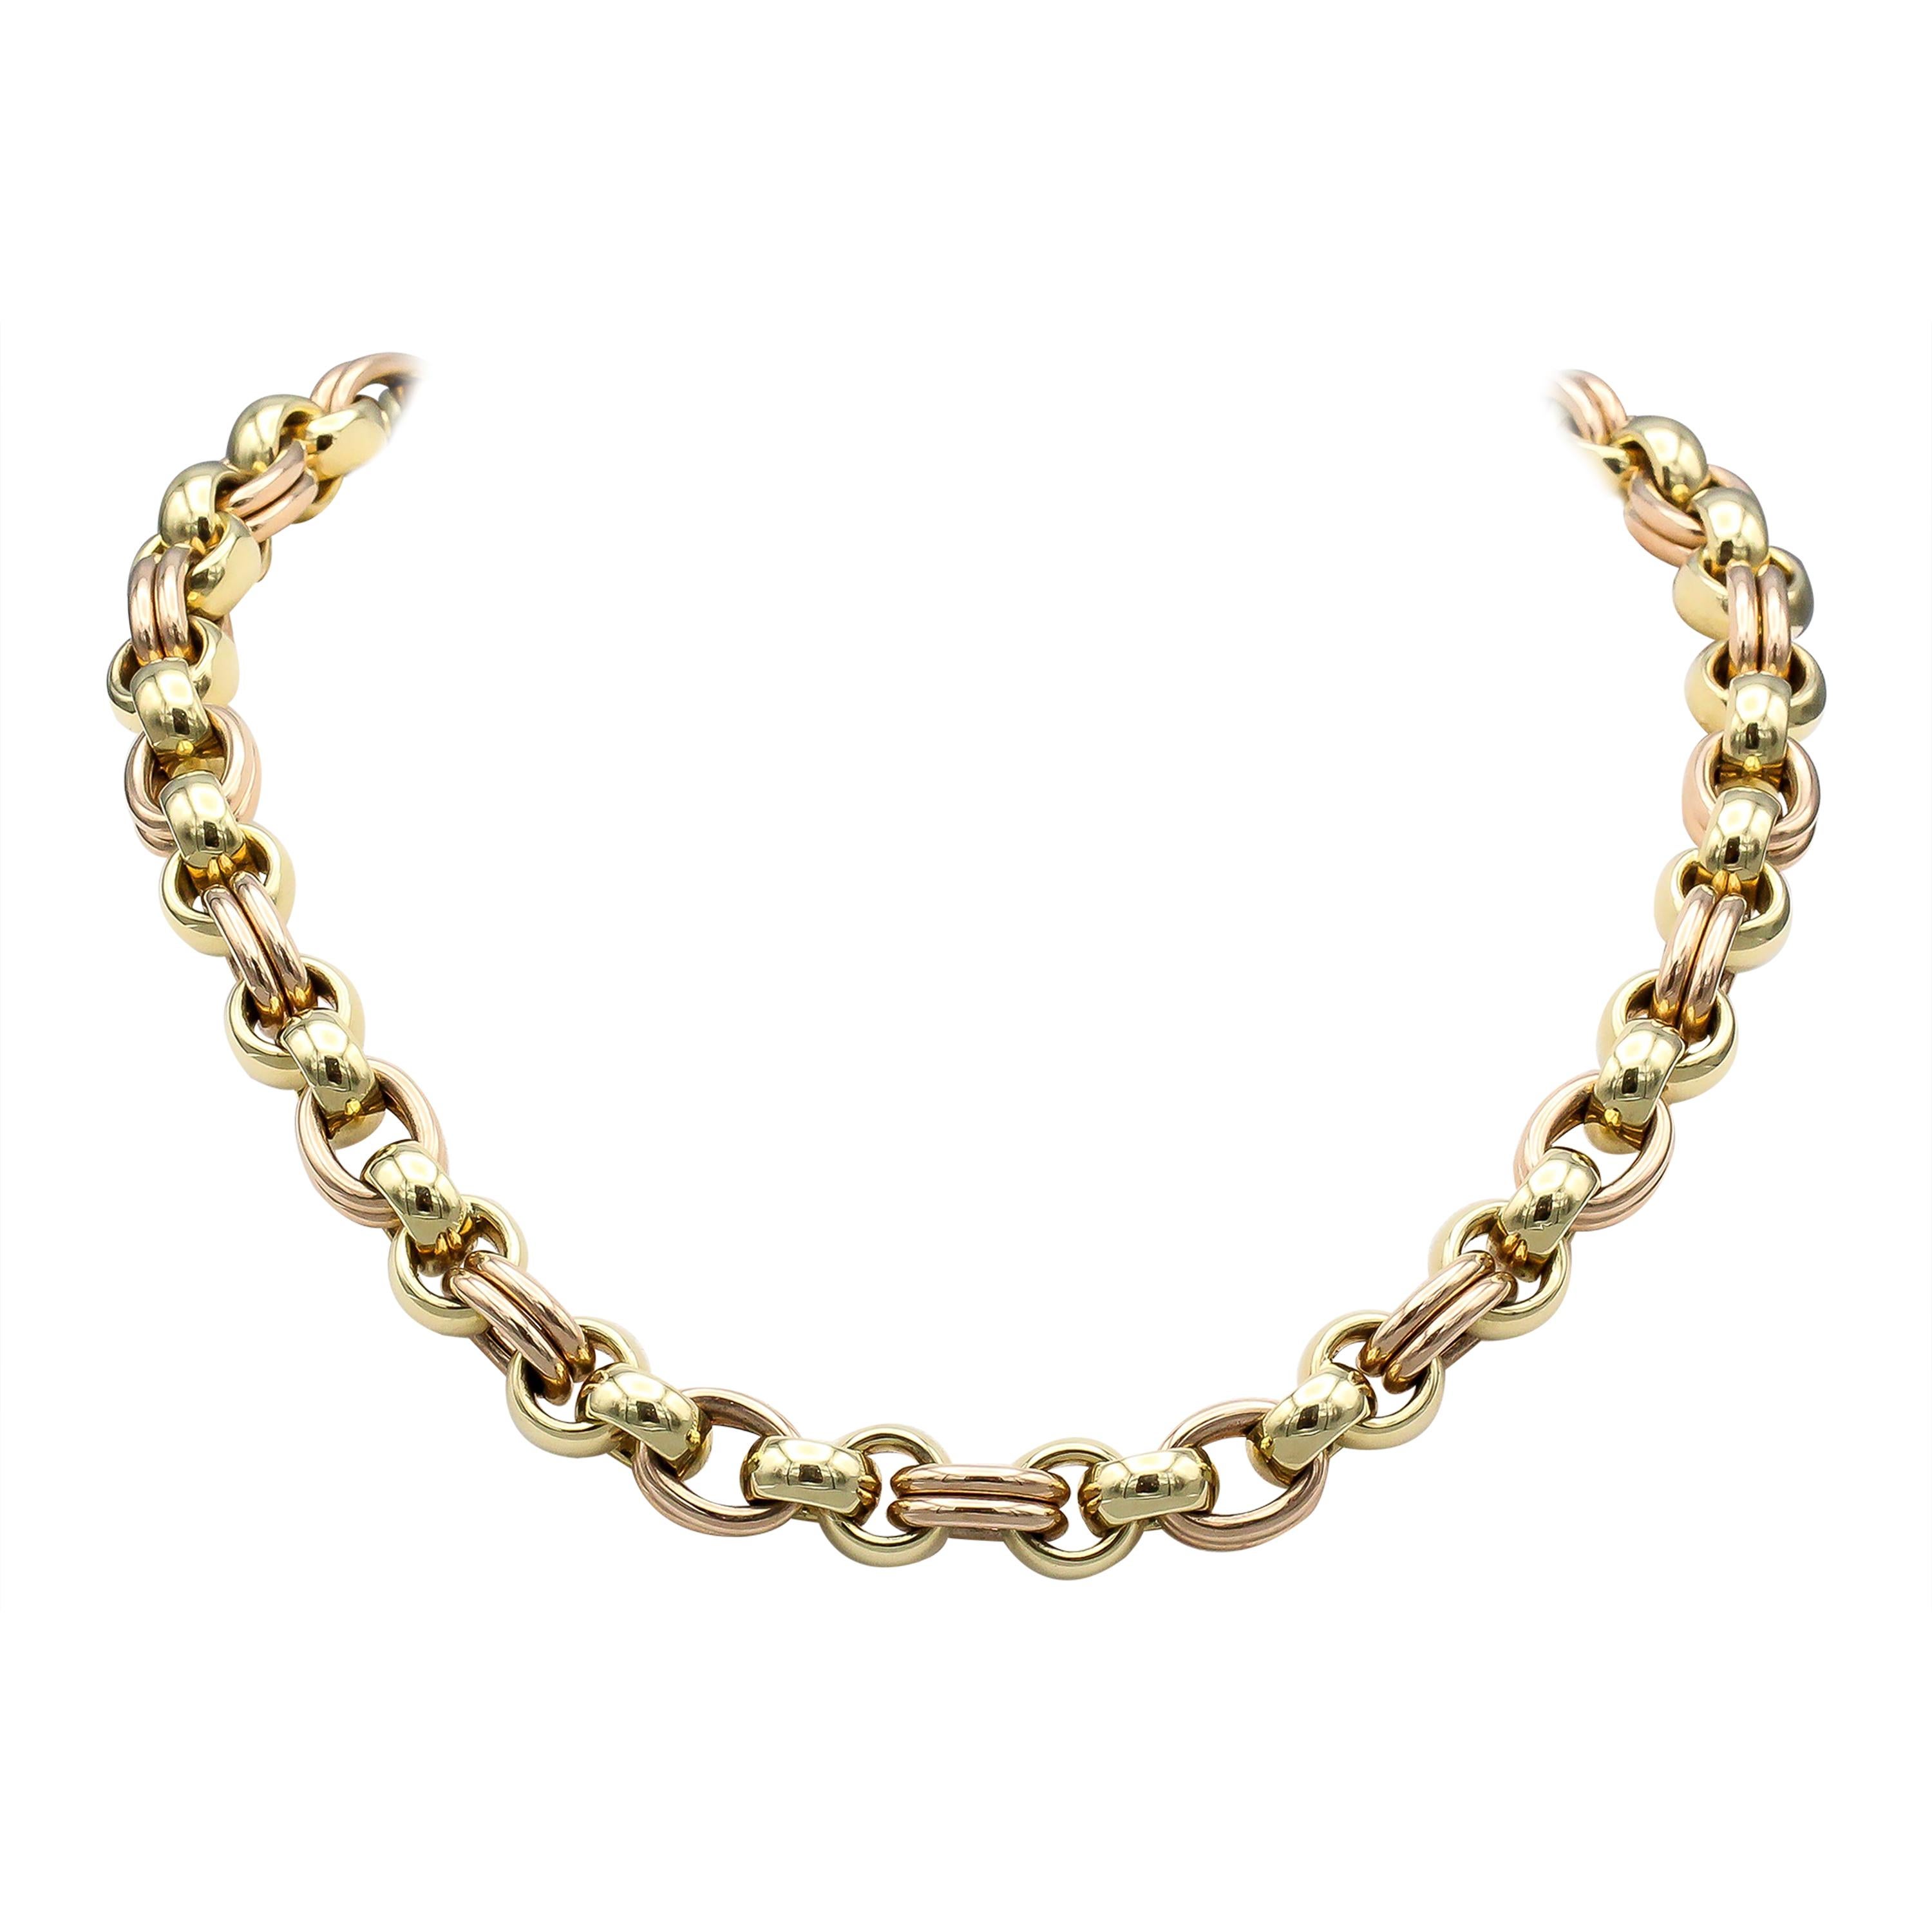 Chopard Les Chaines 18 Karat Rose Yellow Gold Link Necklace